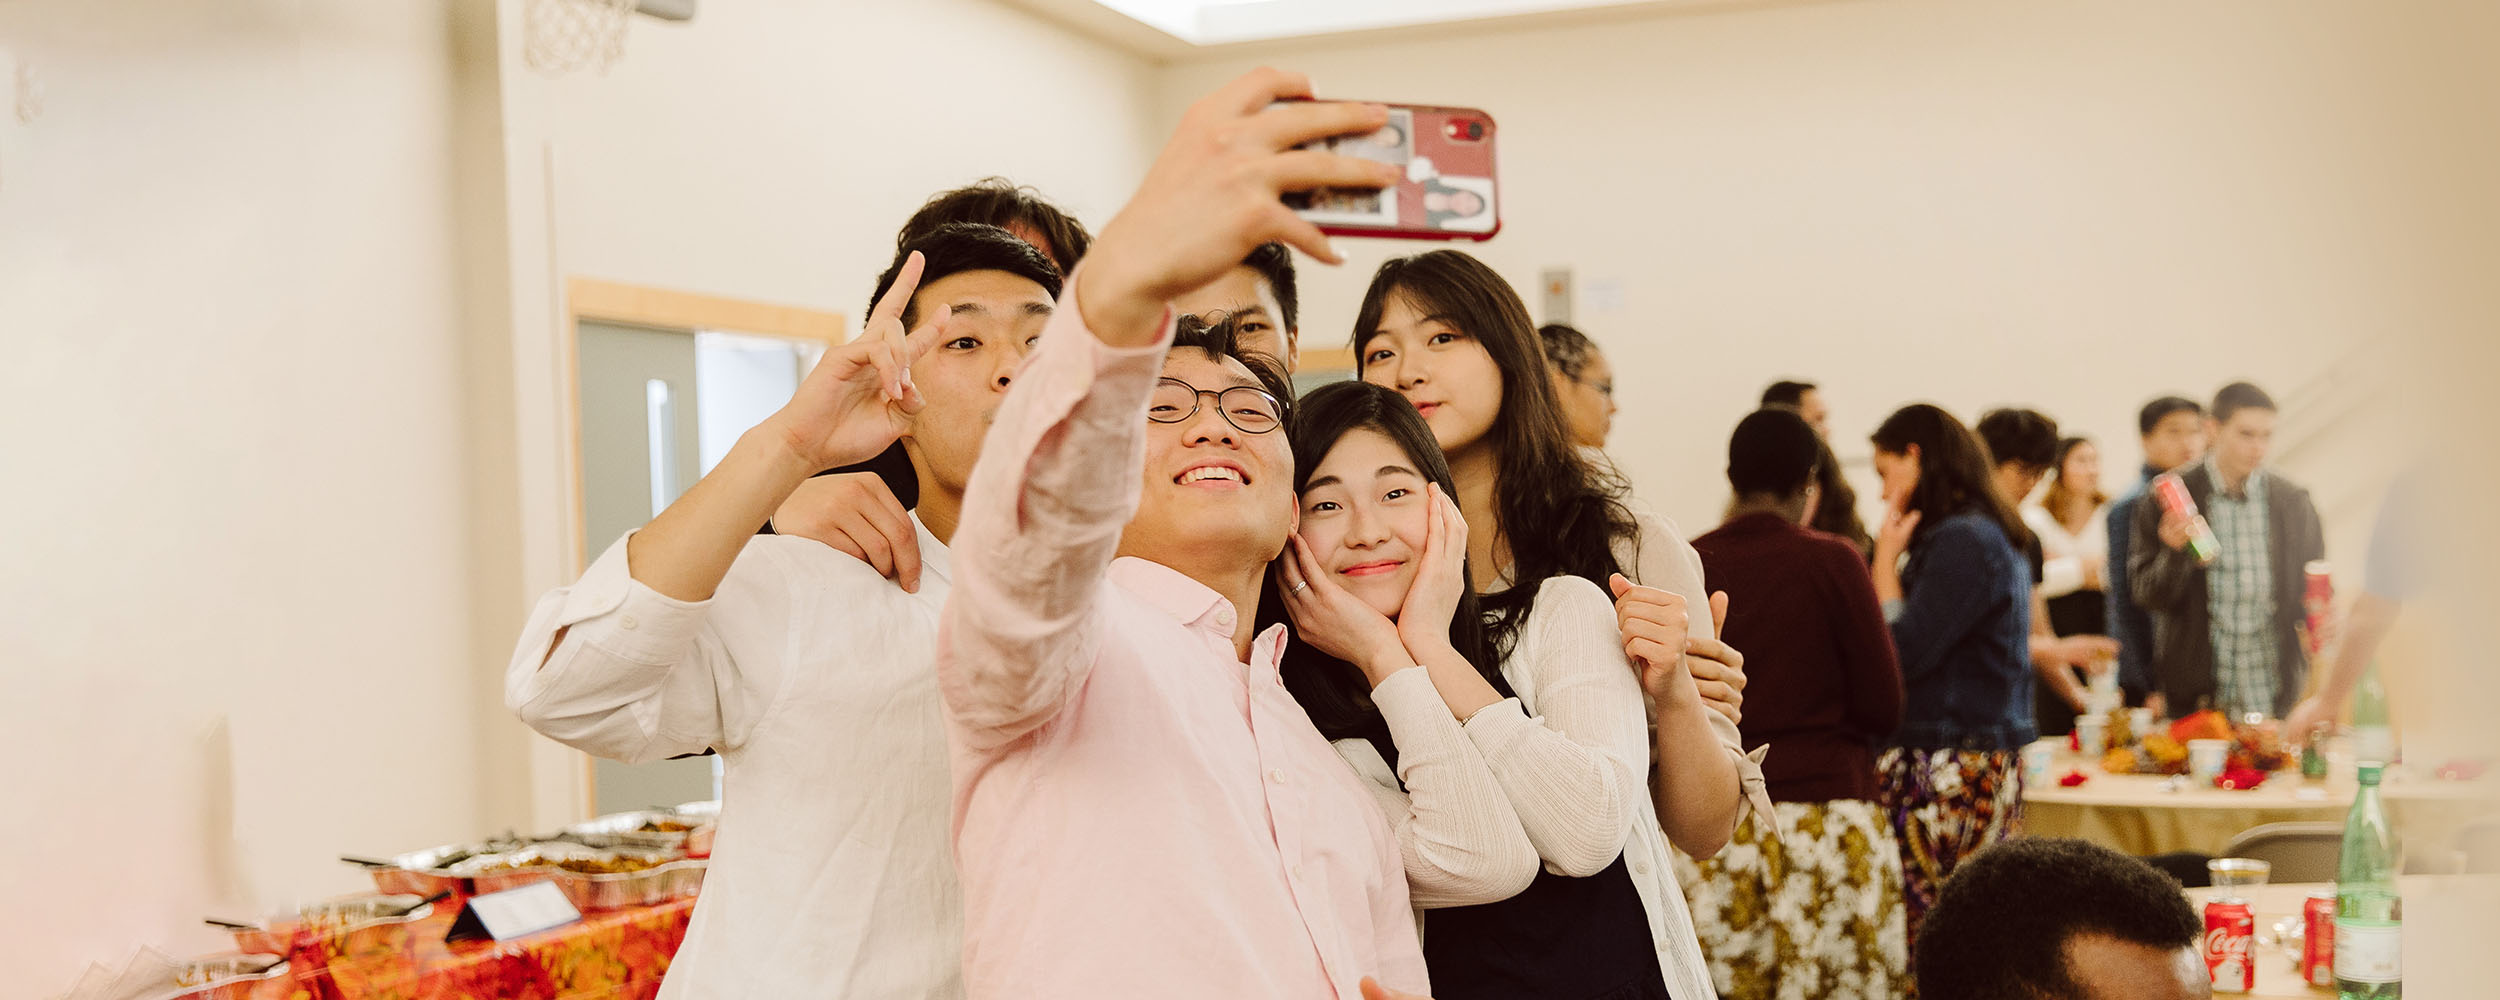 Friends taking group selfie together